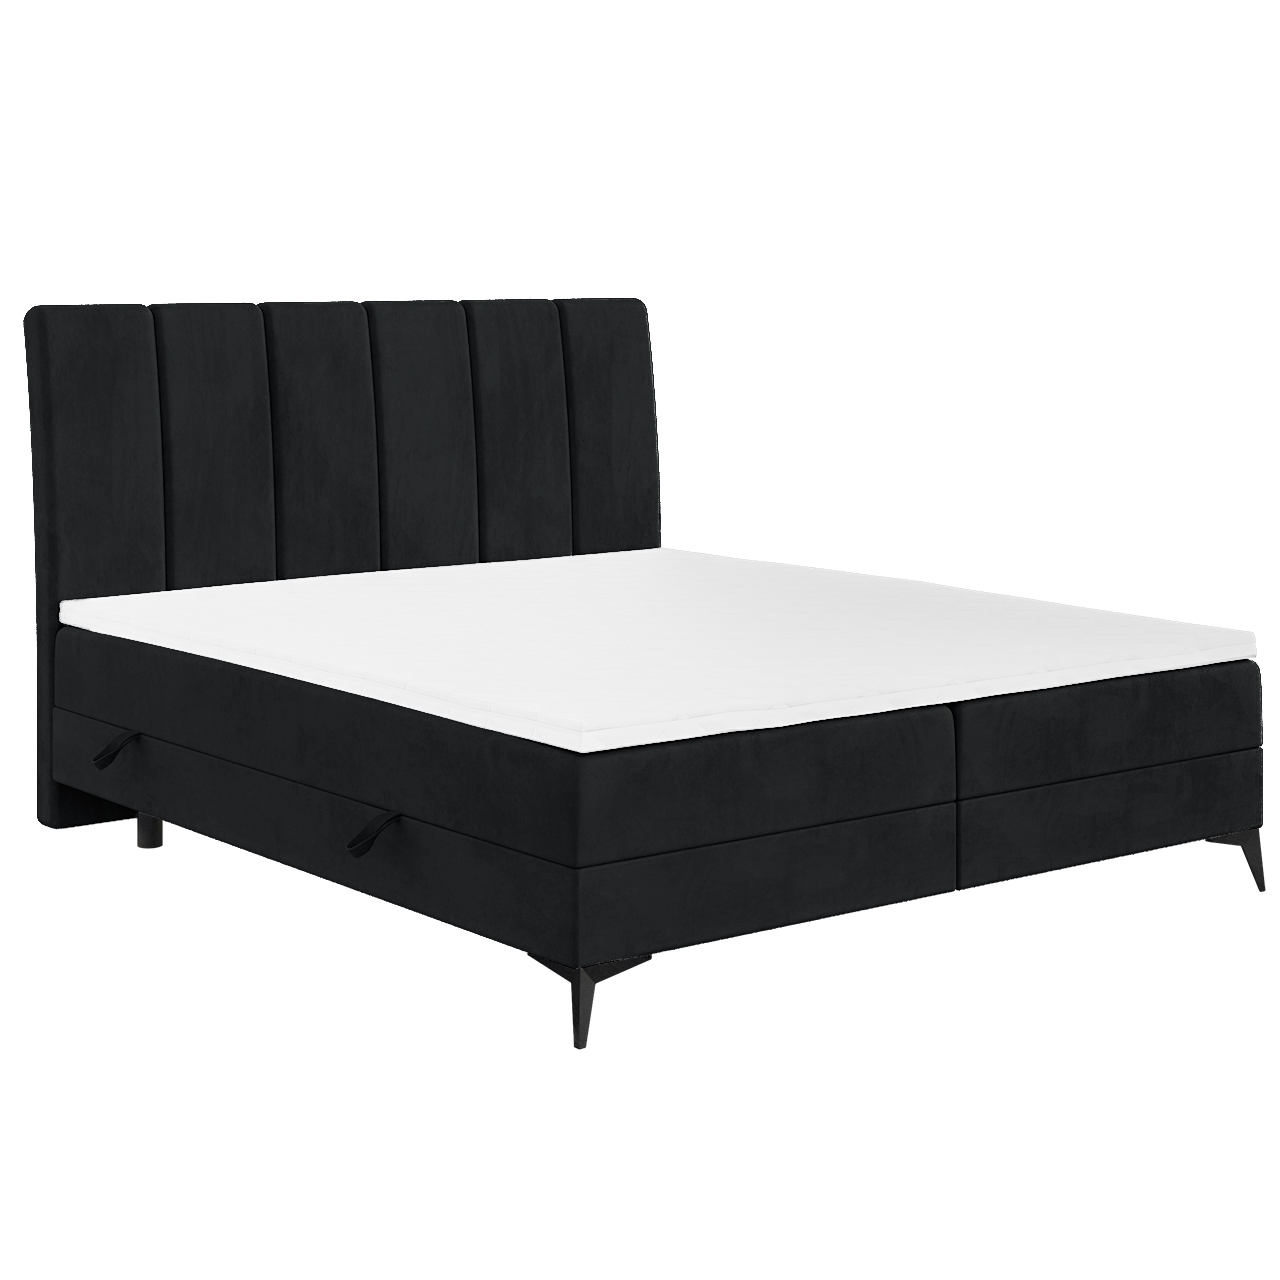 Upholstered bed ABERT 180x200 riviera 100